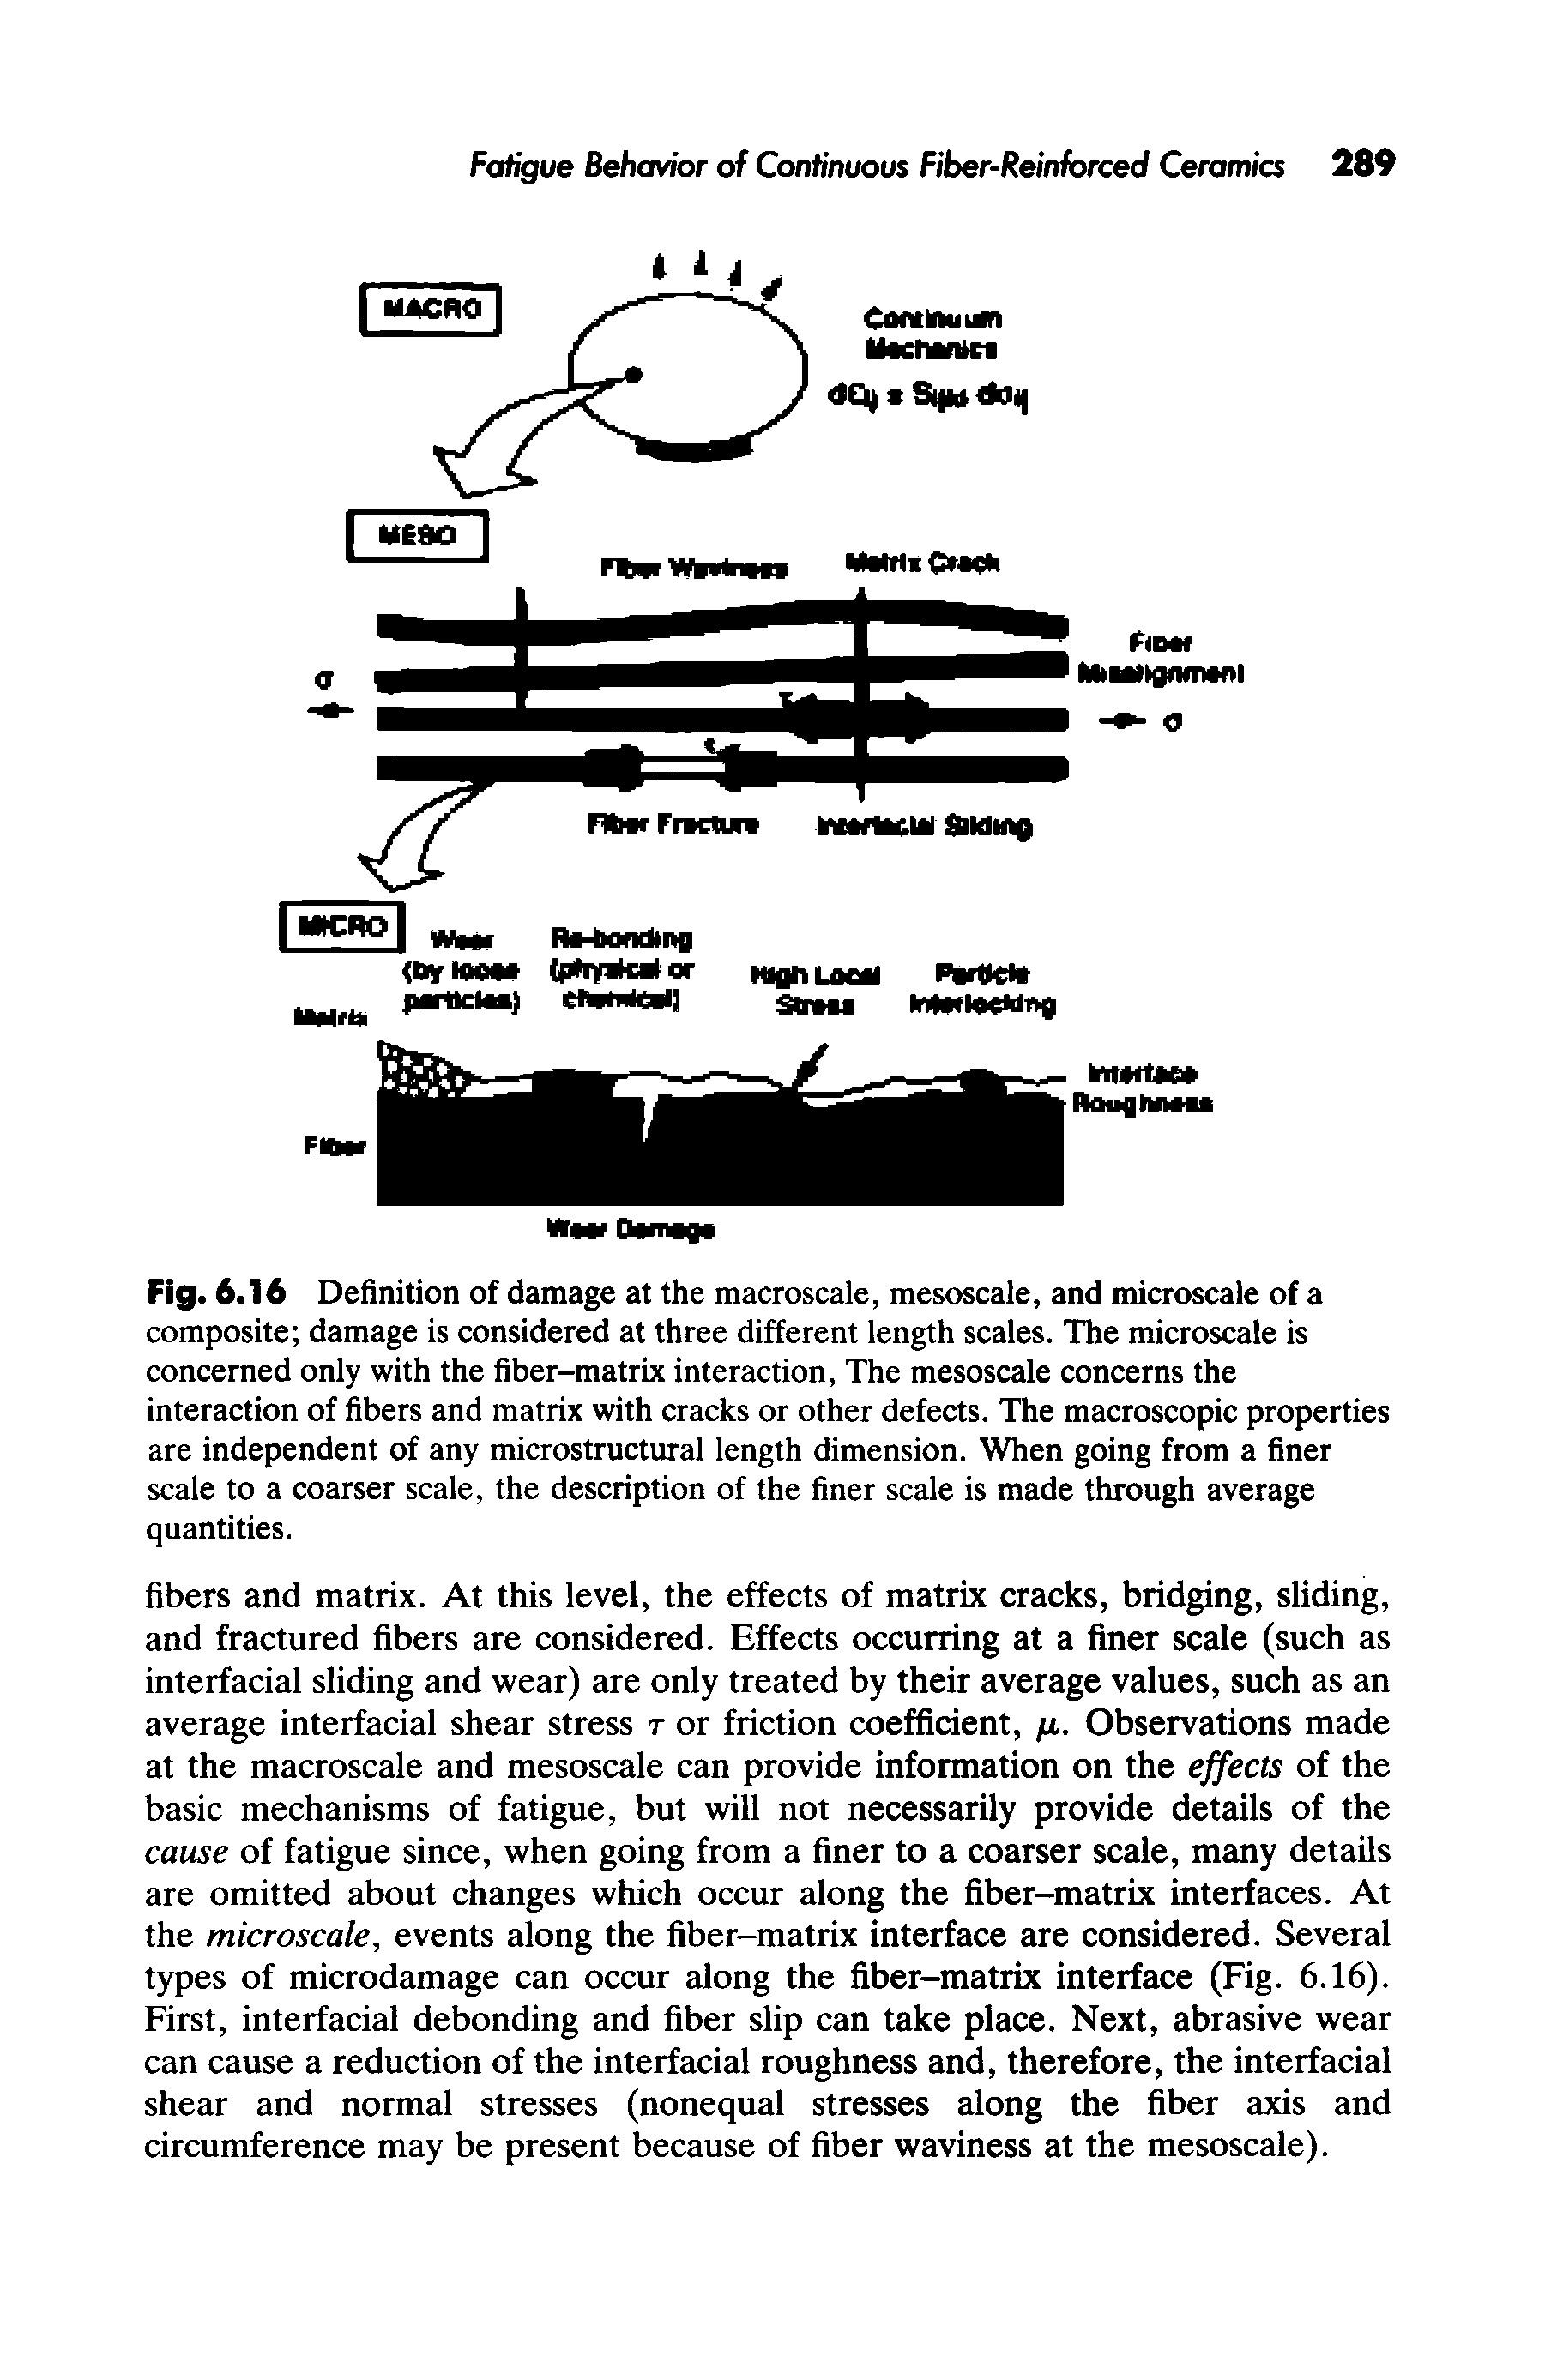 Fig. 6.16 Definition of damage at the macroscale, mesoscale, and microscale of a composite damage is considered at three different length scales. The microscale is concerned only with the fiber-matrix interaction, The mesoscale concerns the interaction of fibers and matrix with cracks or other defects. The macroscopic properties are independent of any microstructural length dimension. When going from a finer scale to a coarser scale, the description of the finer scale is made through average quantities.